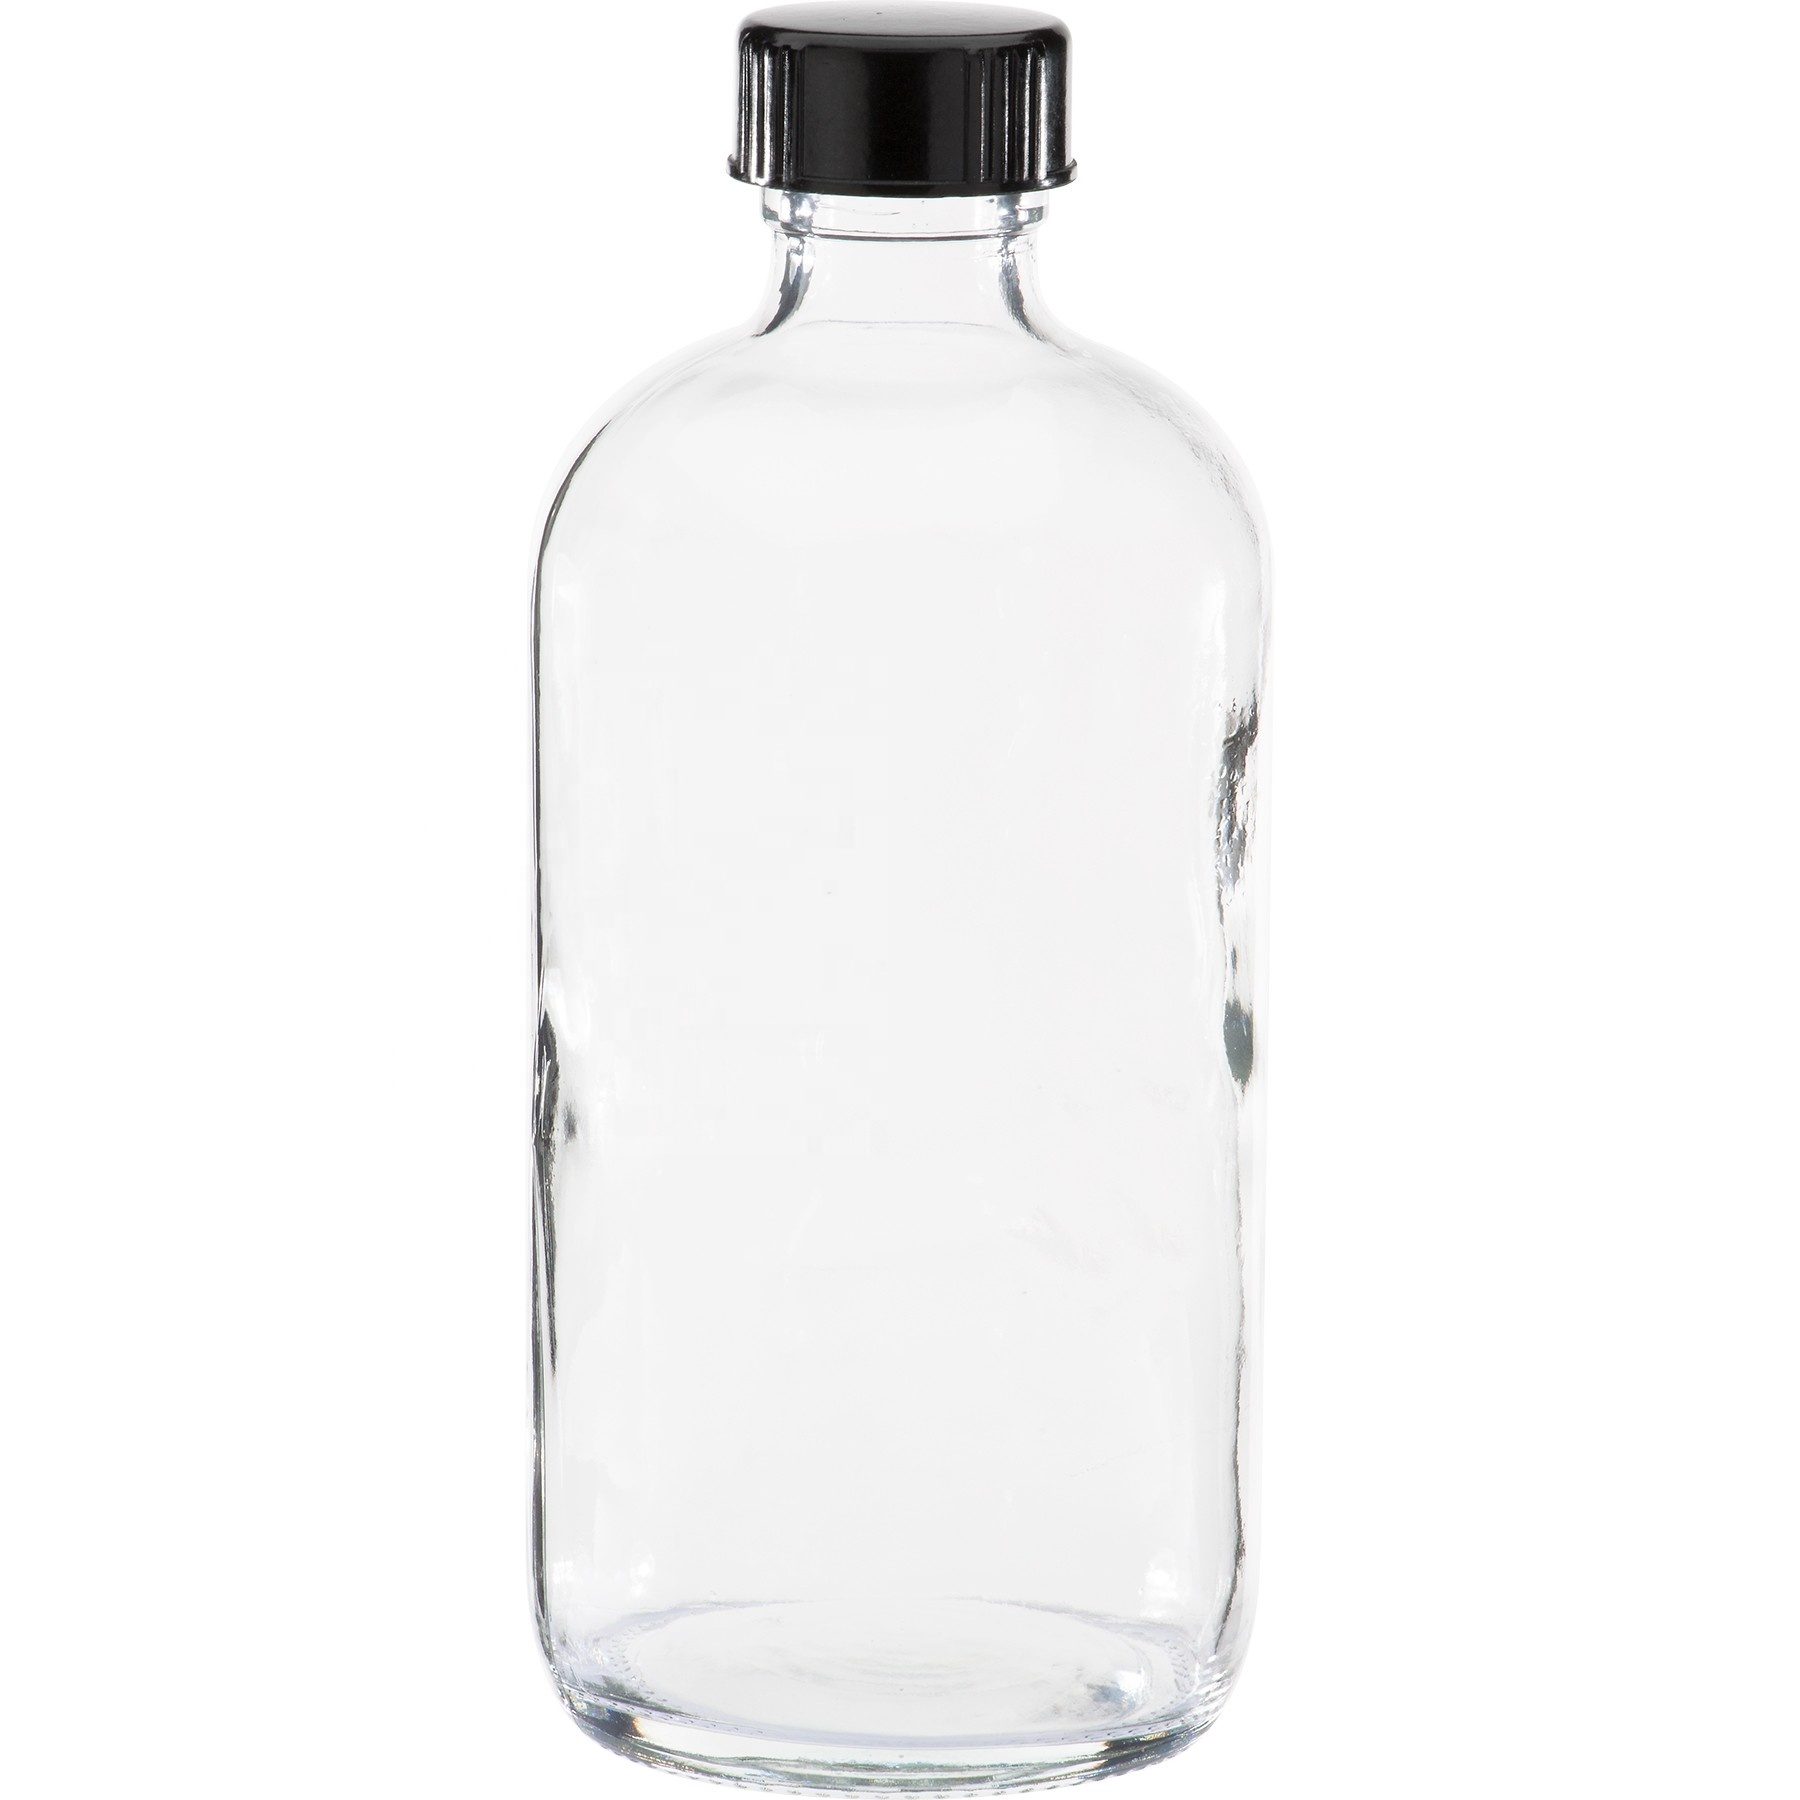 32oz 1000Ml Clear Boston Round Spray Bottle Glass With Trigger Sprayer for Home Cleaning